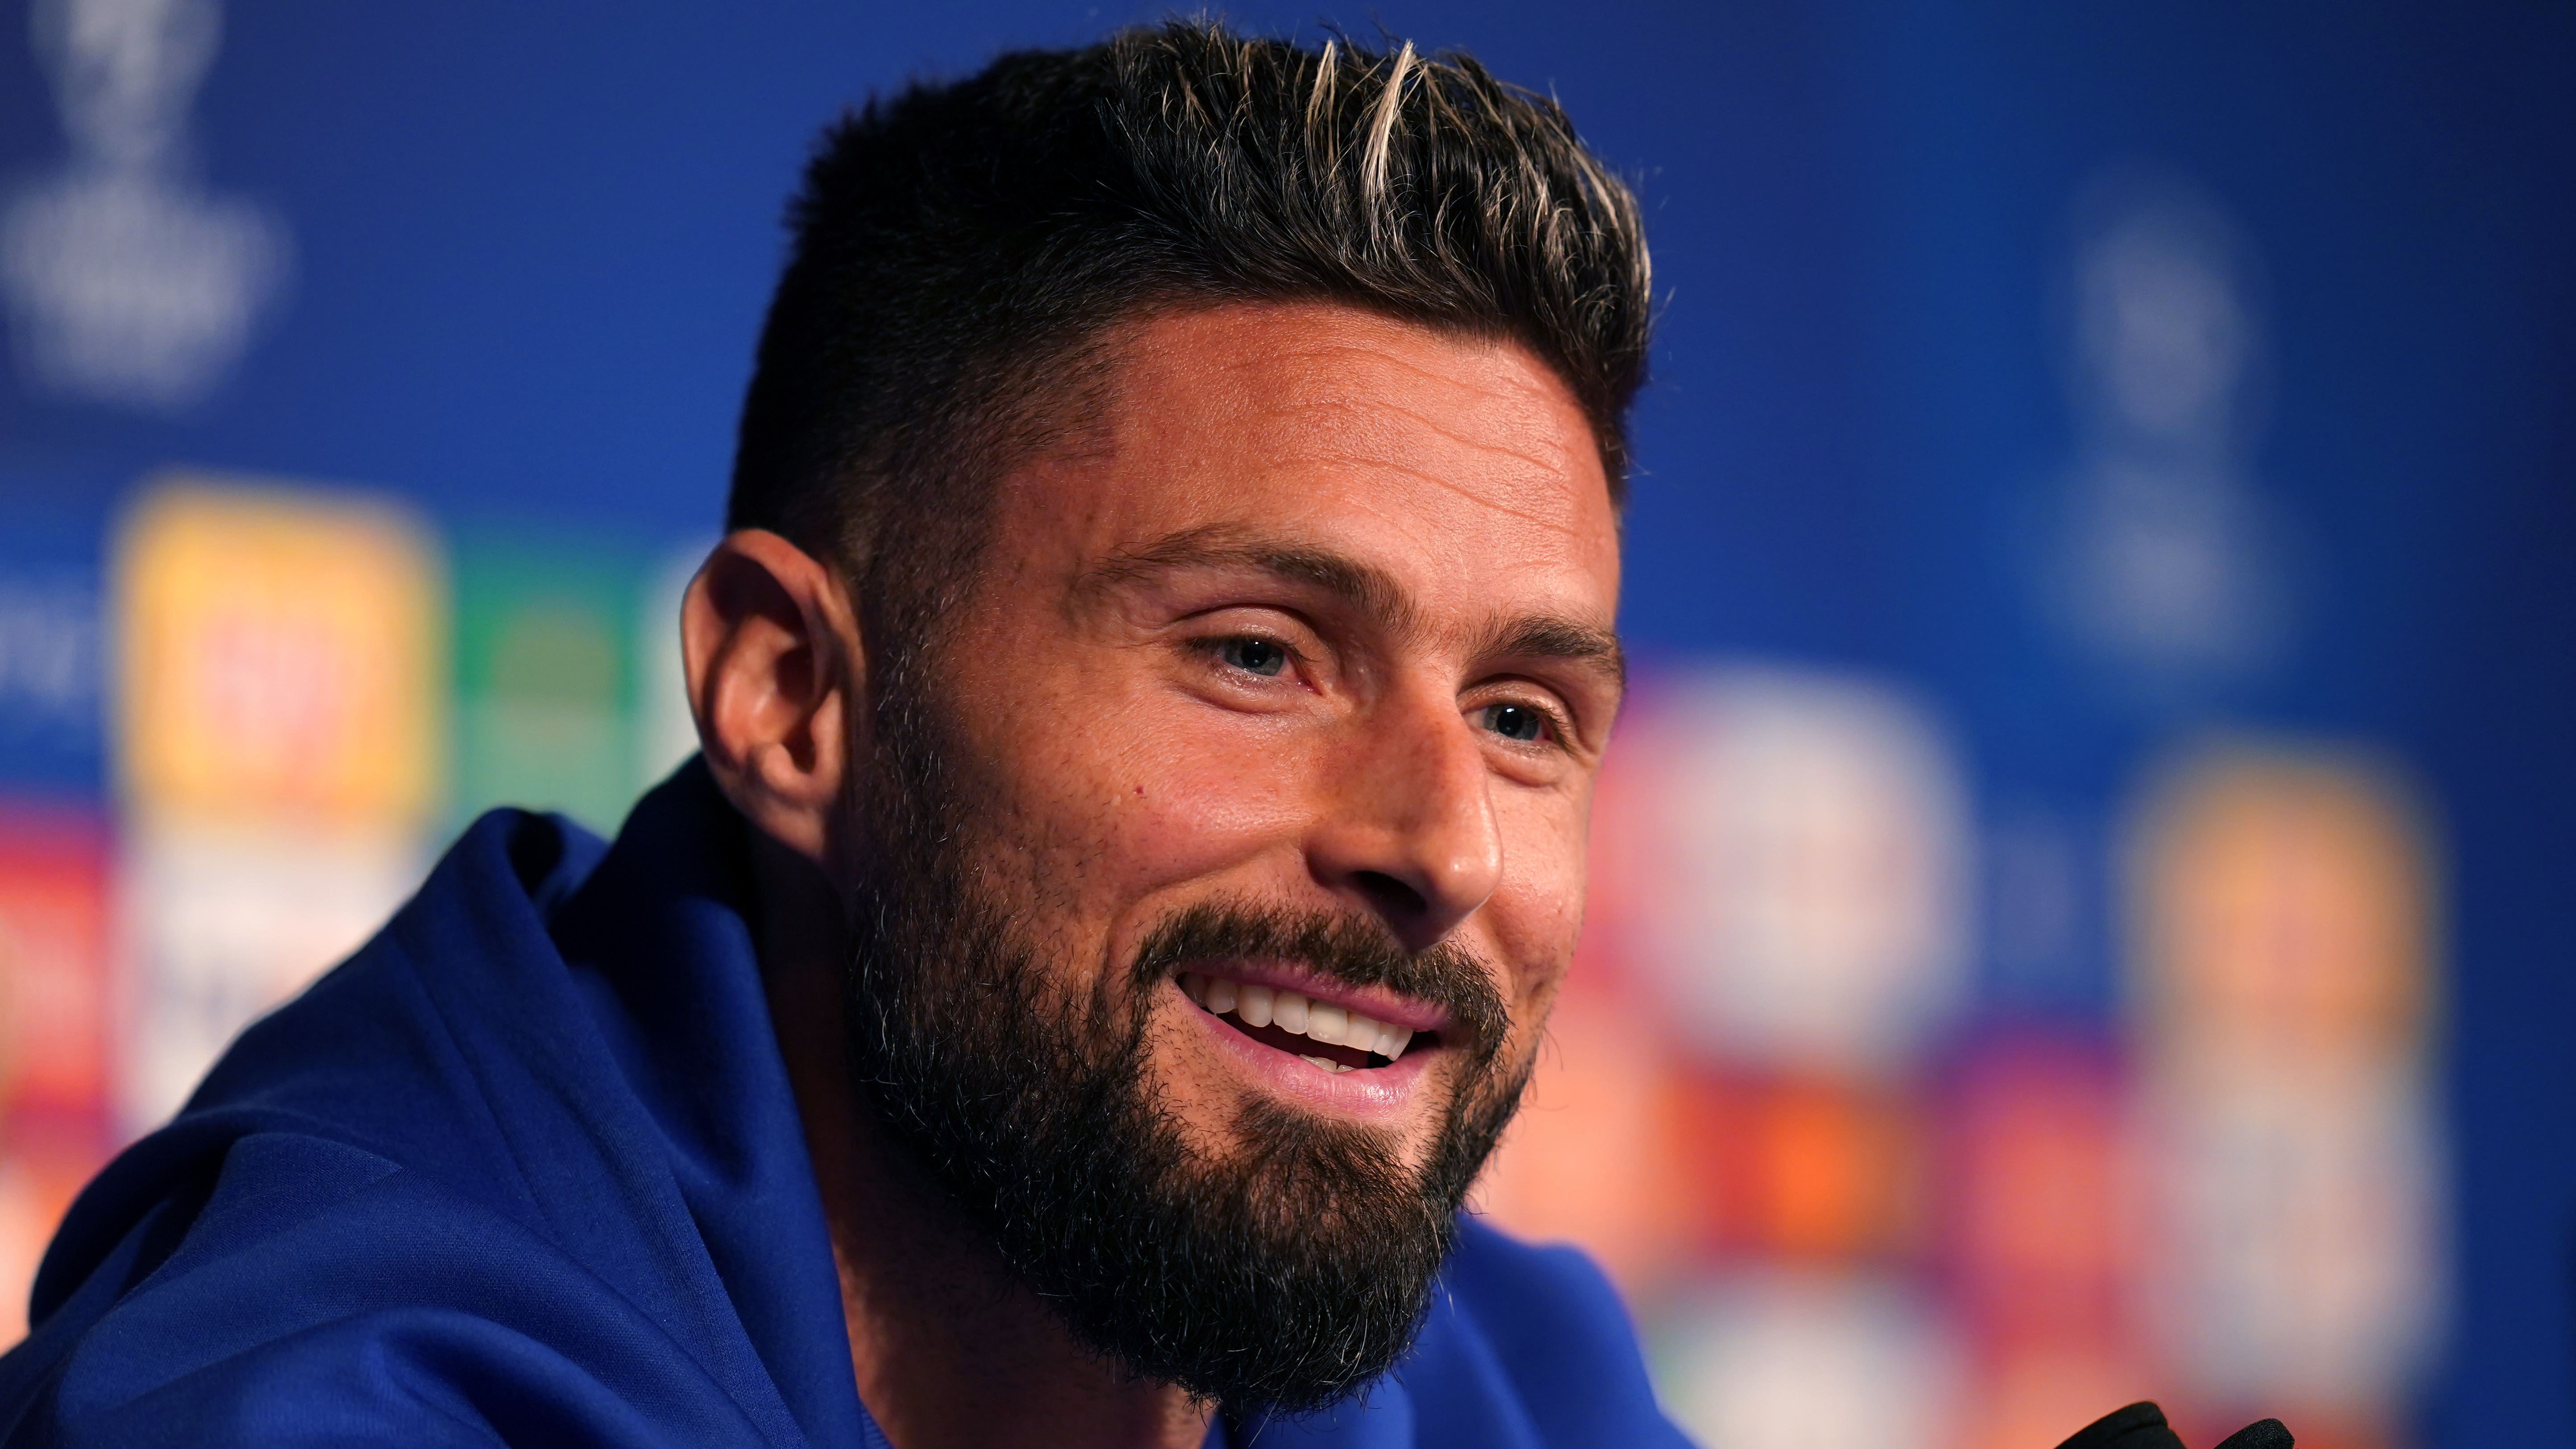 From Milan to Los Angeles – Olivier Giroud set for MLS stint